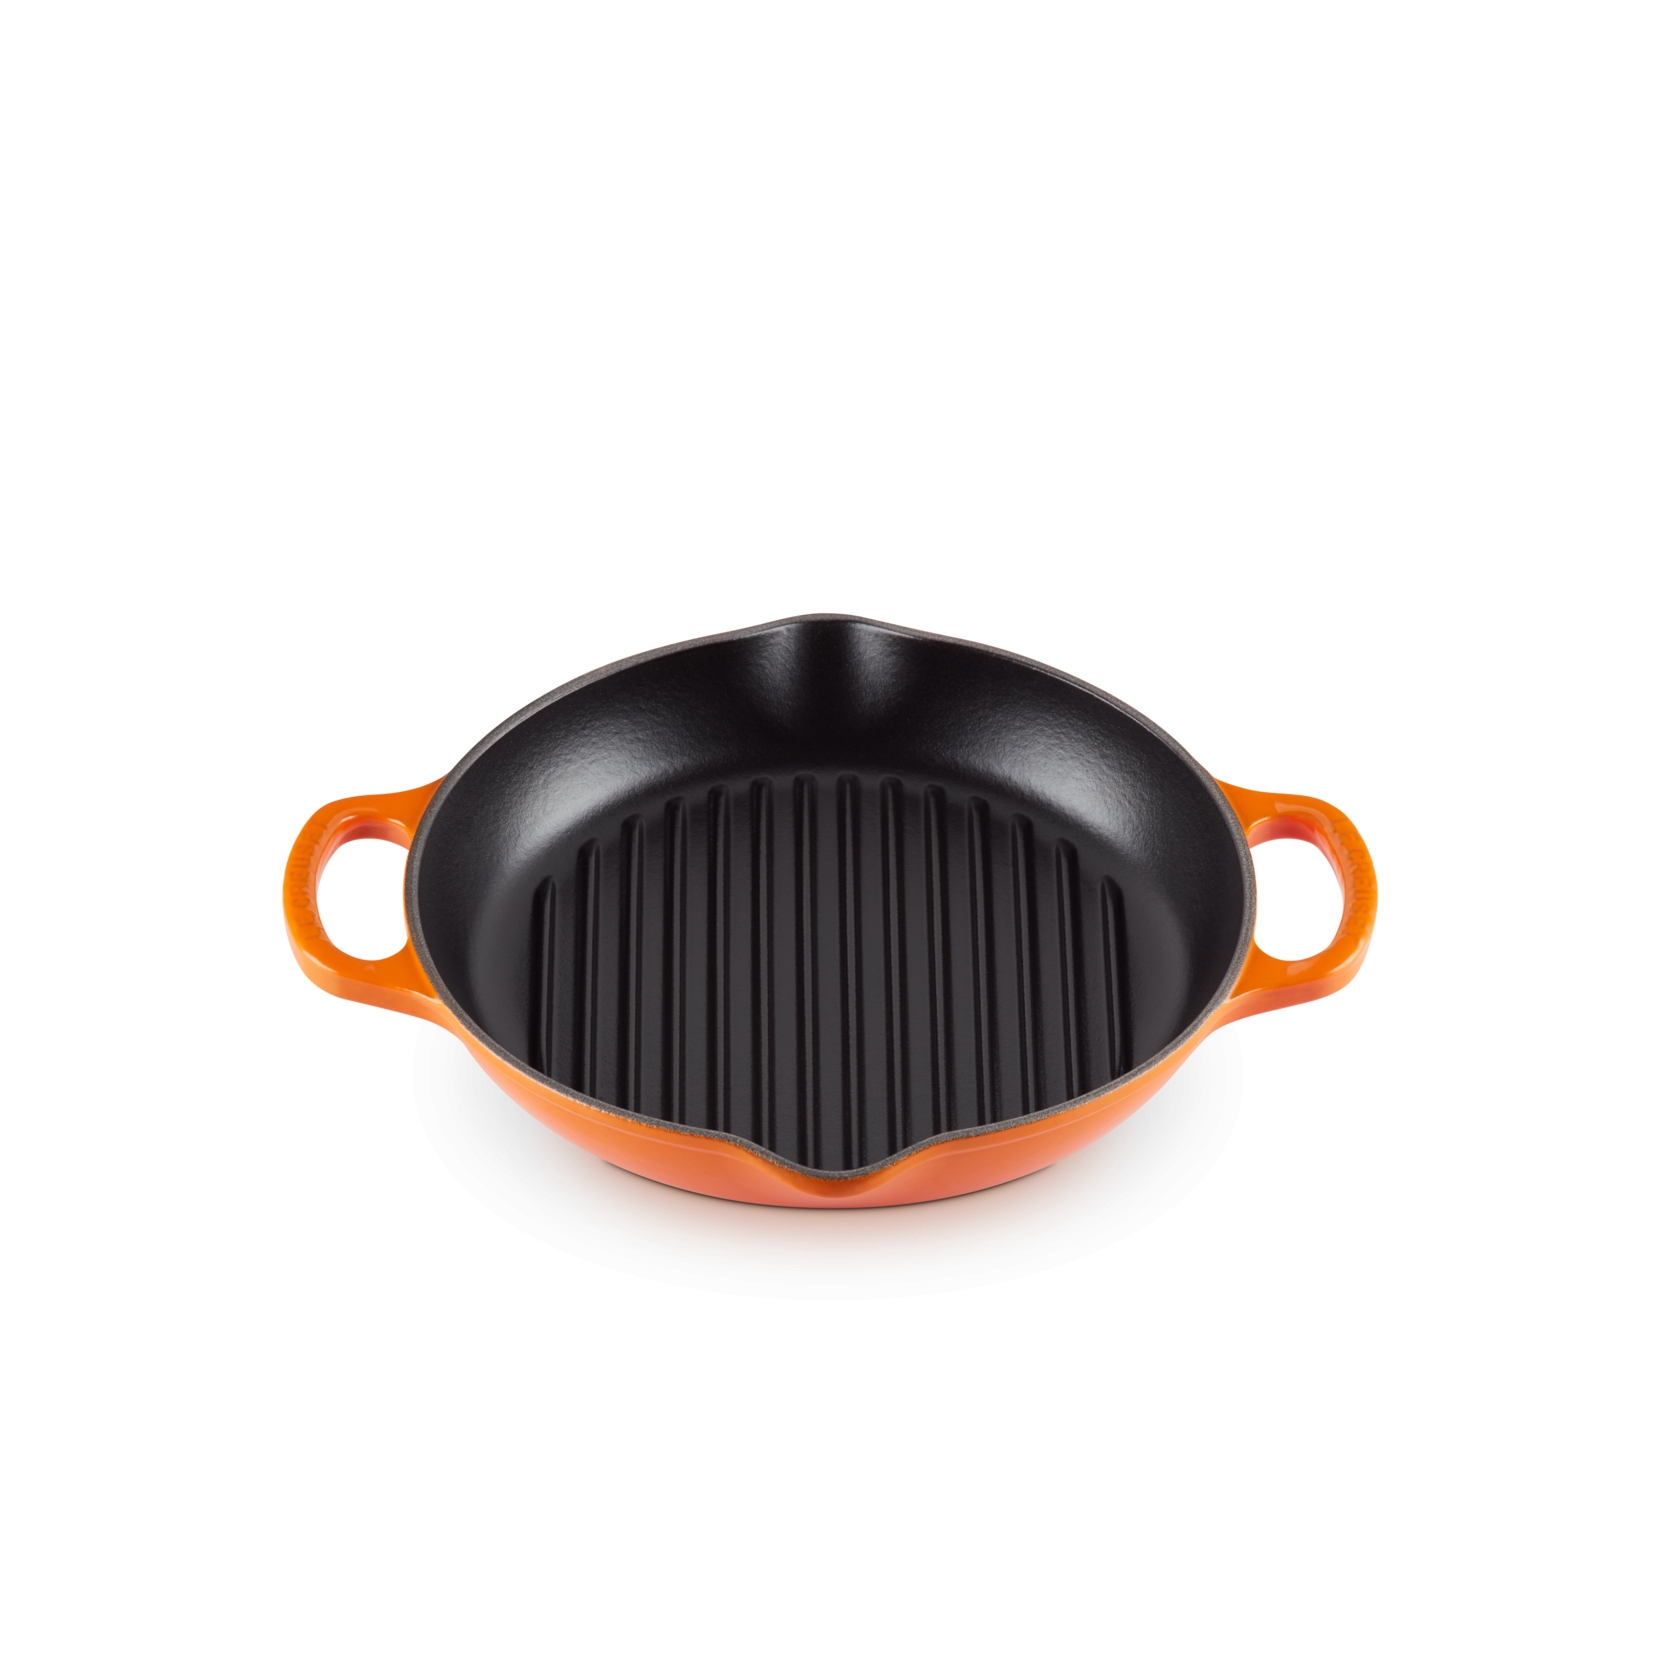 Le Creuset Cast Iron 12 Oval Skillet Grill